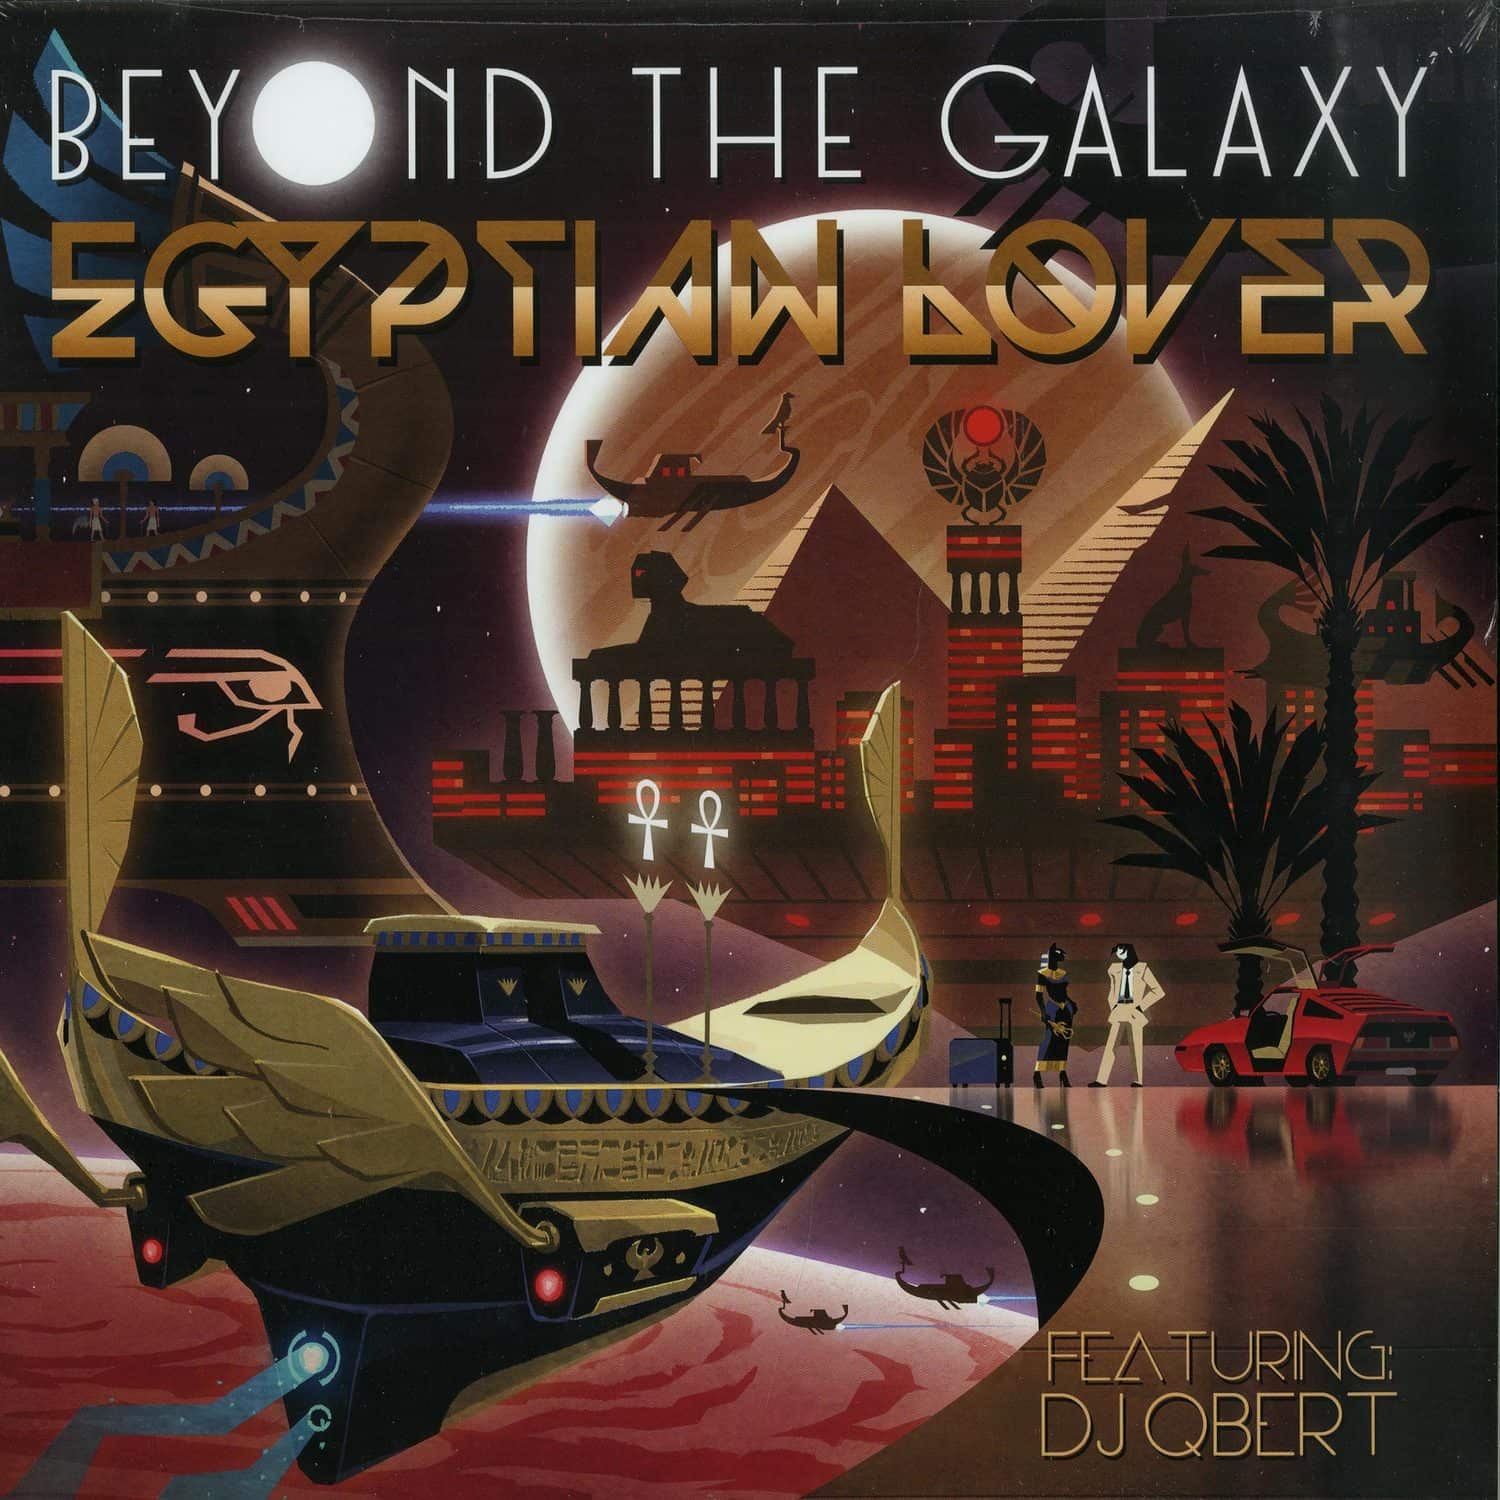 Egyptian Lover - BEYOND THE GALAXY